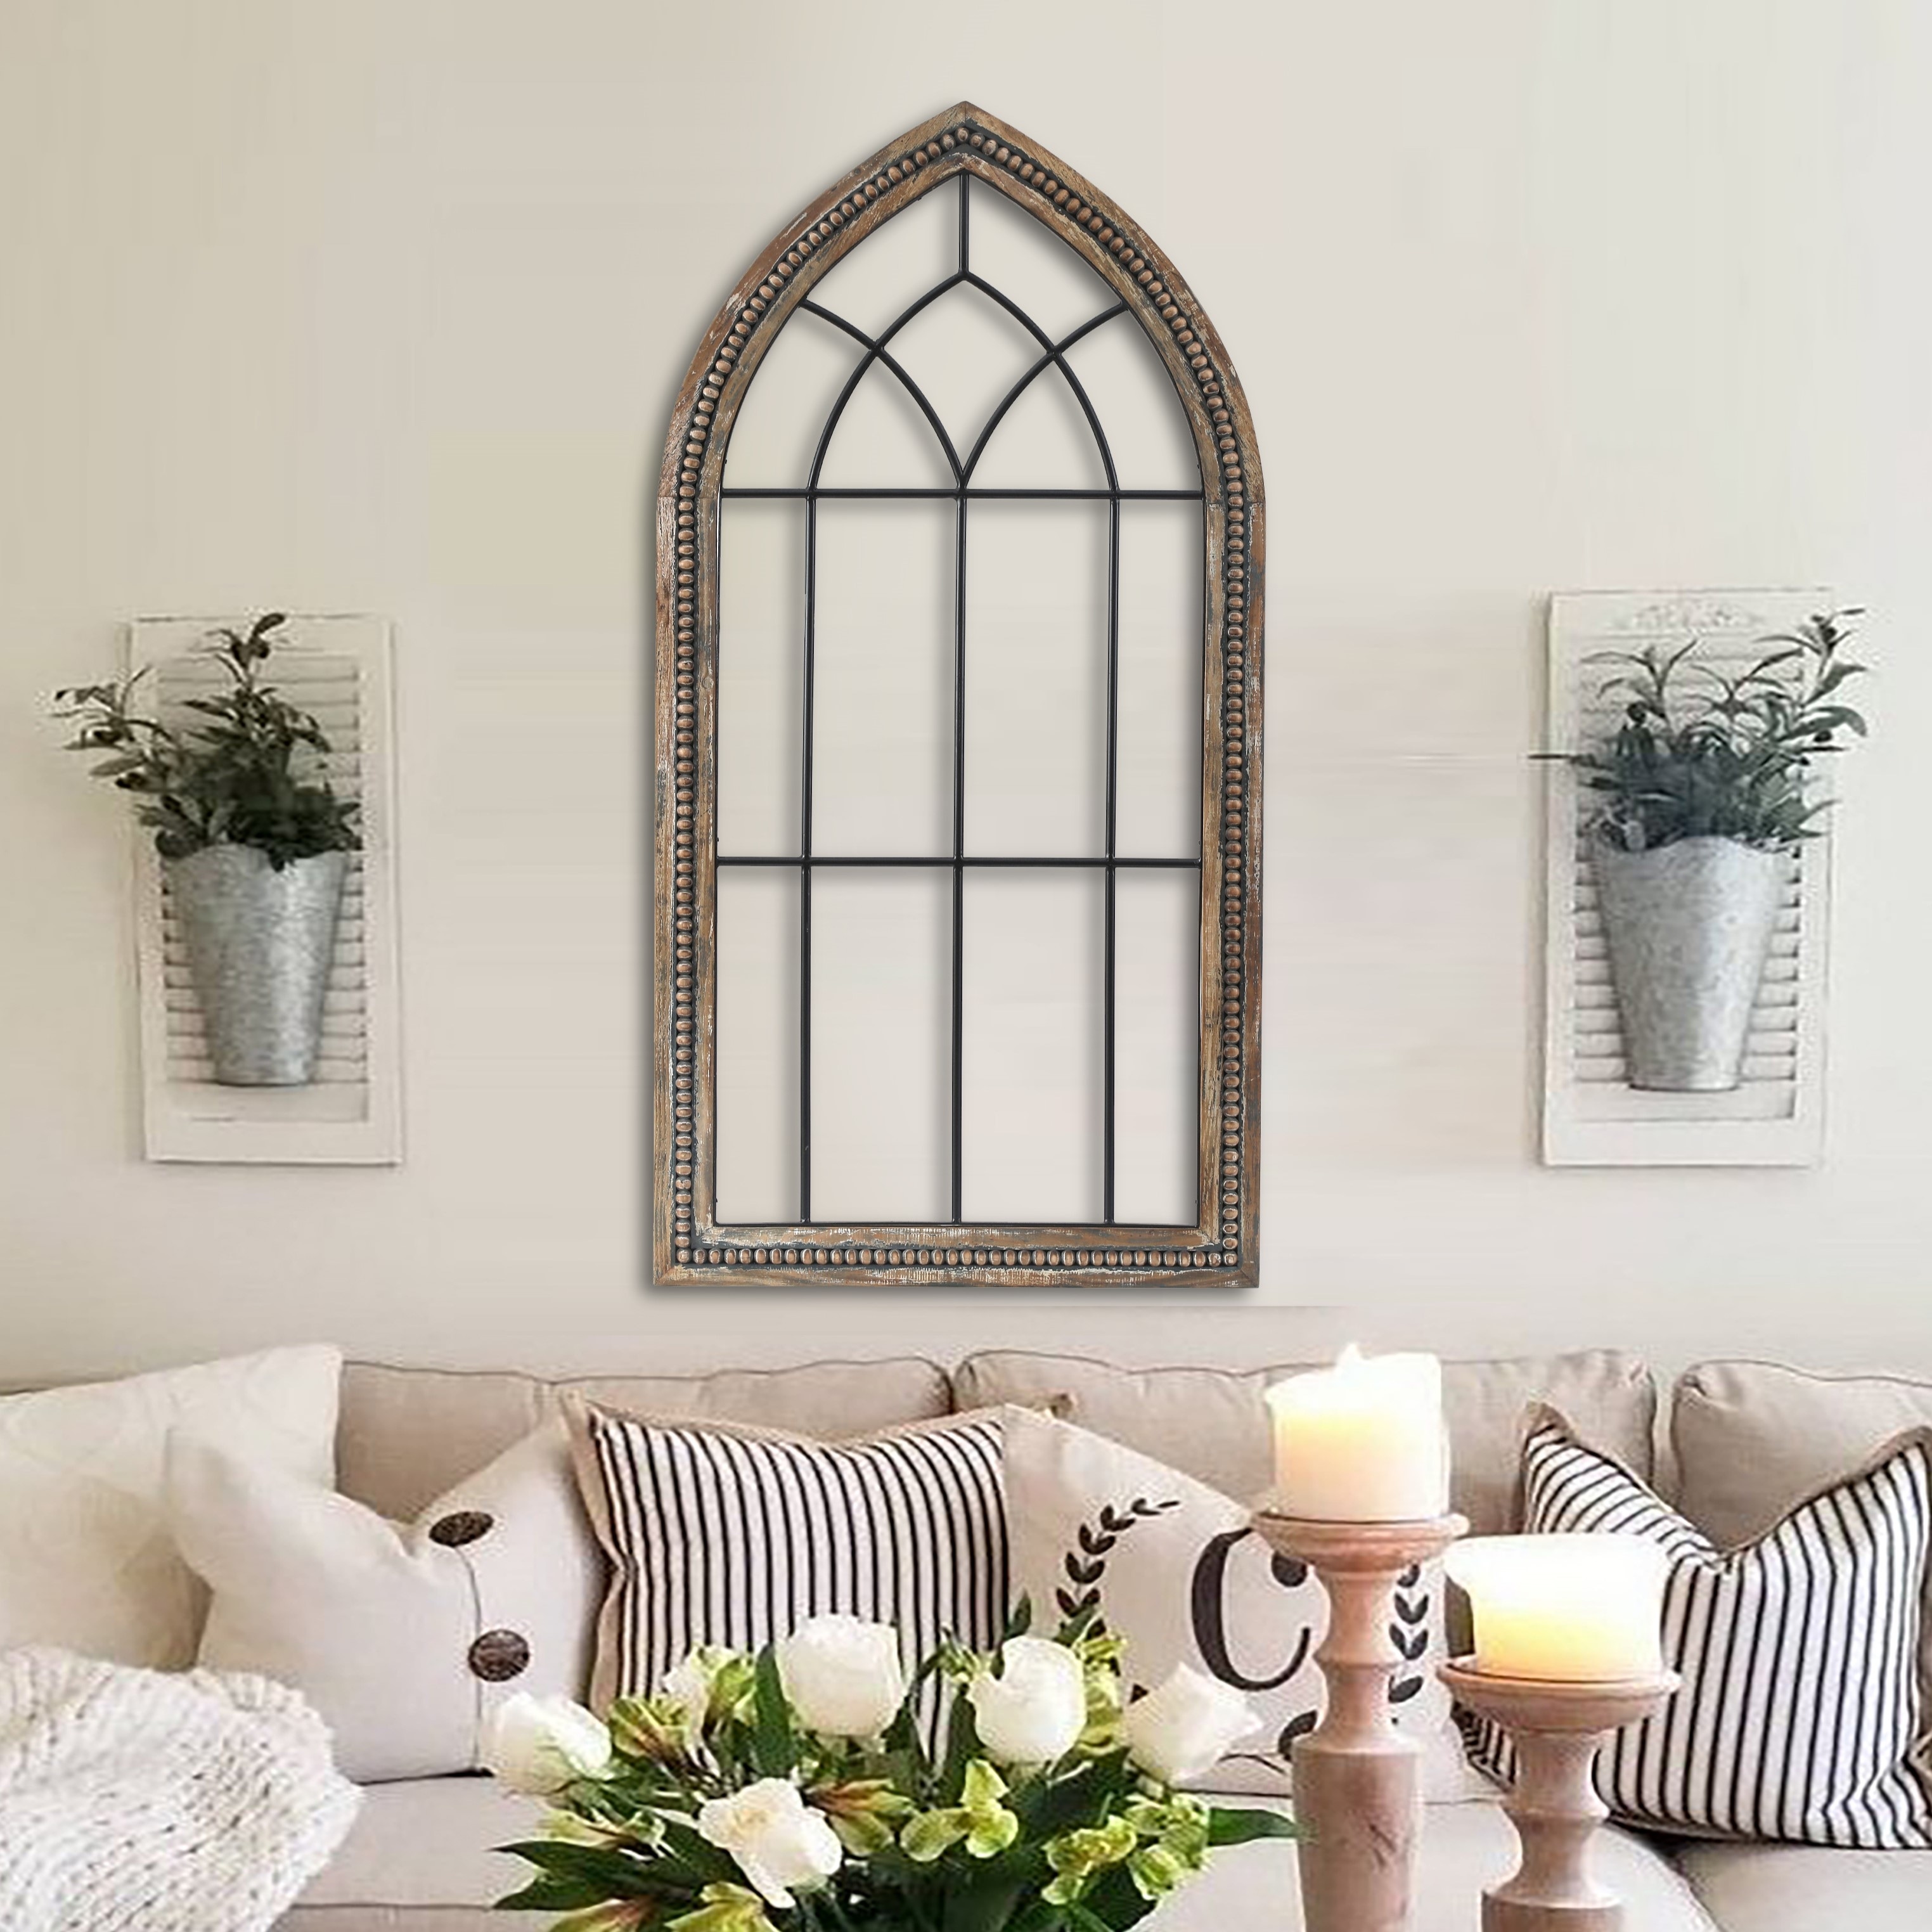 Rustic Wood and Black Metal Arched Window Wall Decor On Sale Bed Bath   Beyond 29473875